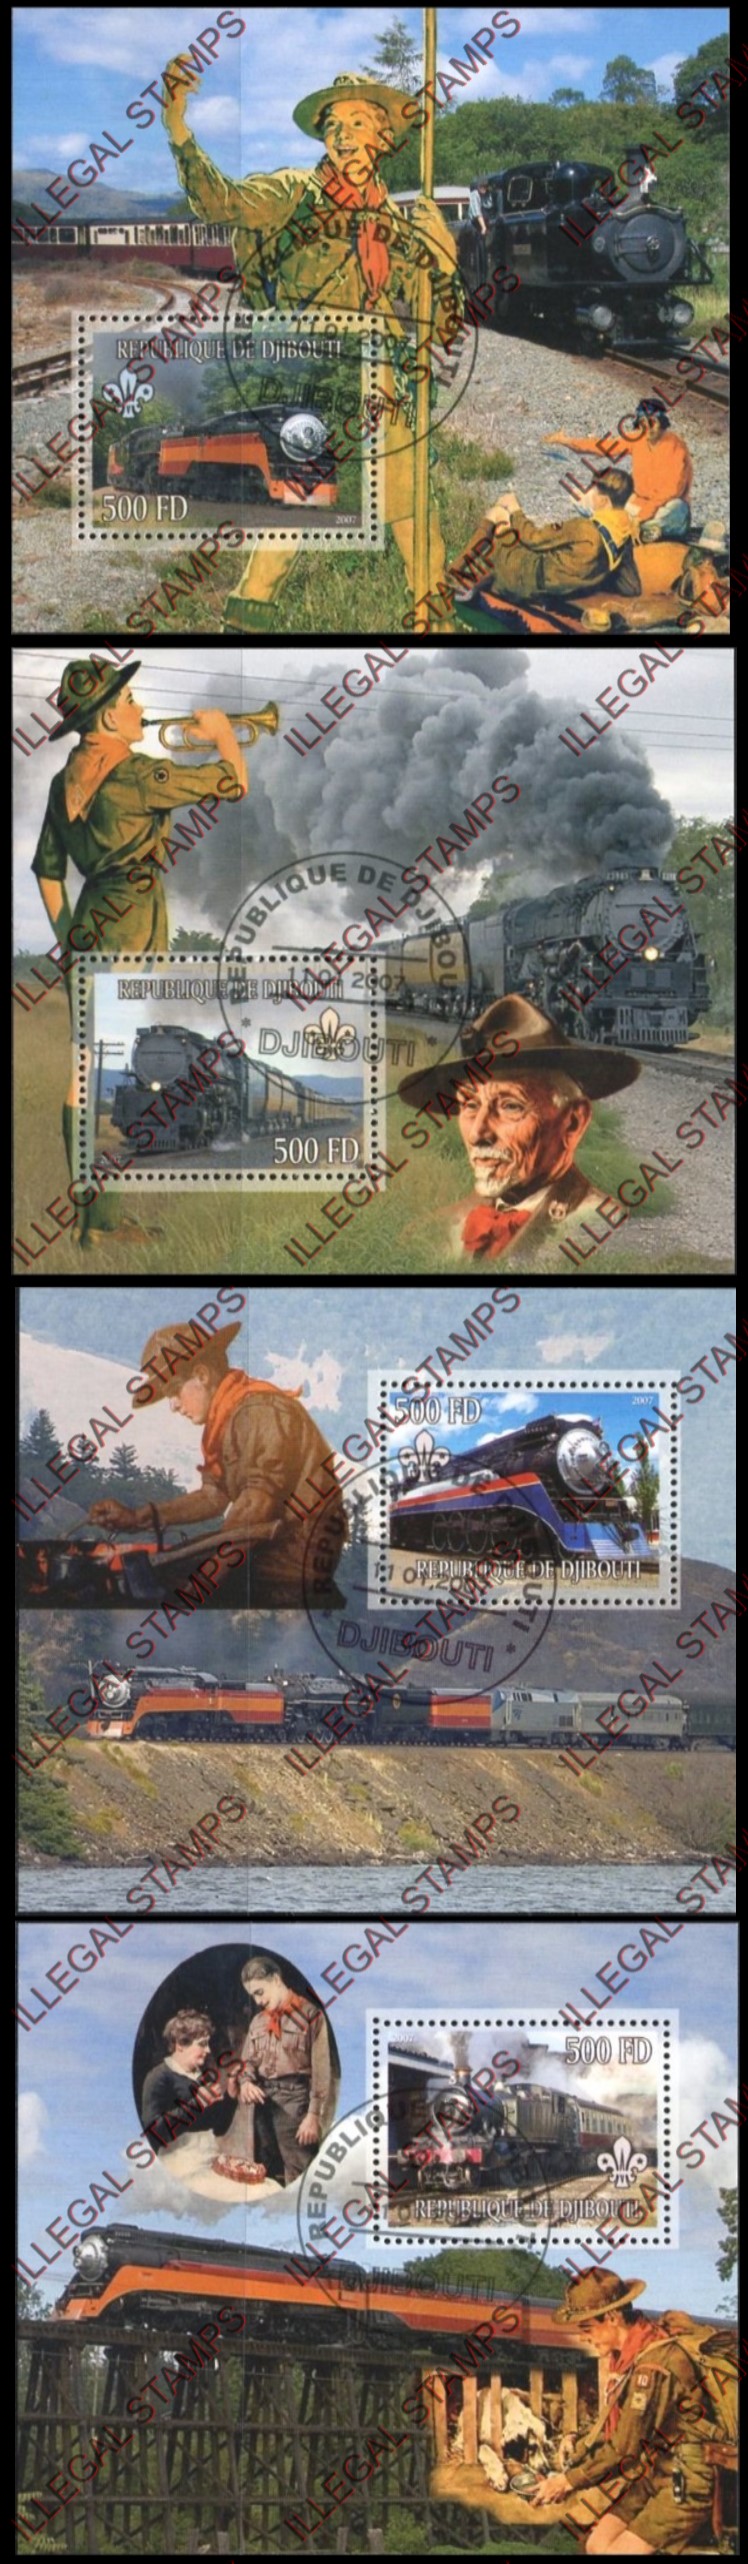 Djibouti 2007 Trains and Scouts Illegal Stamp Souvenir Sheets of 1